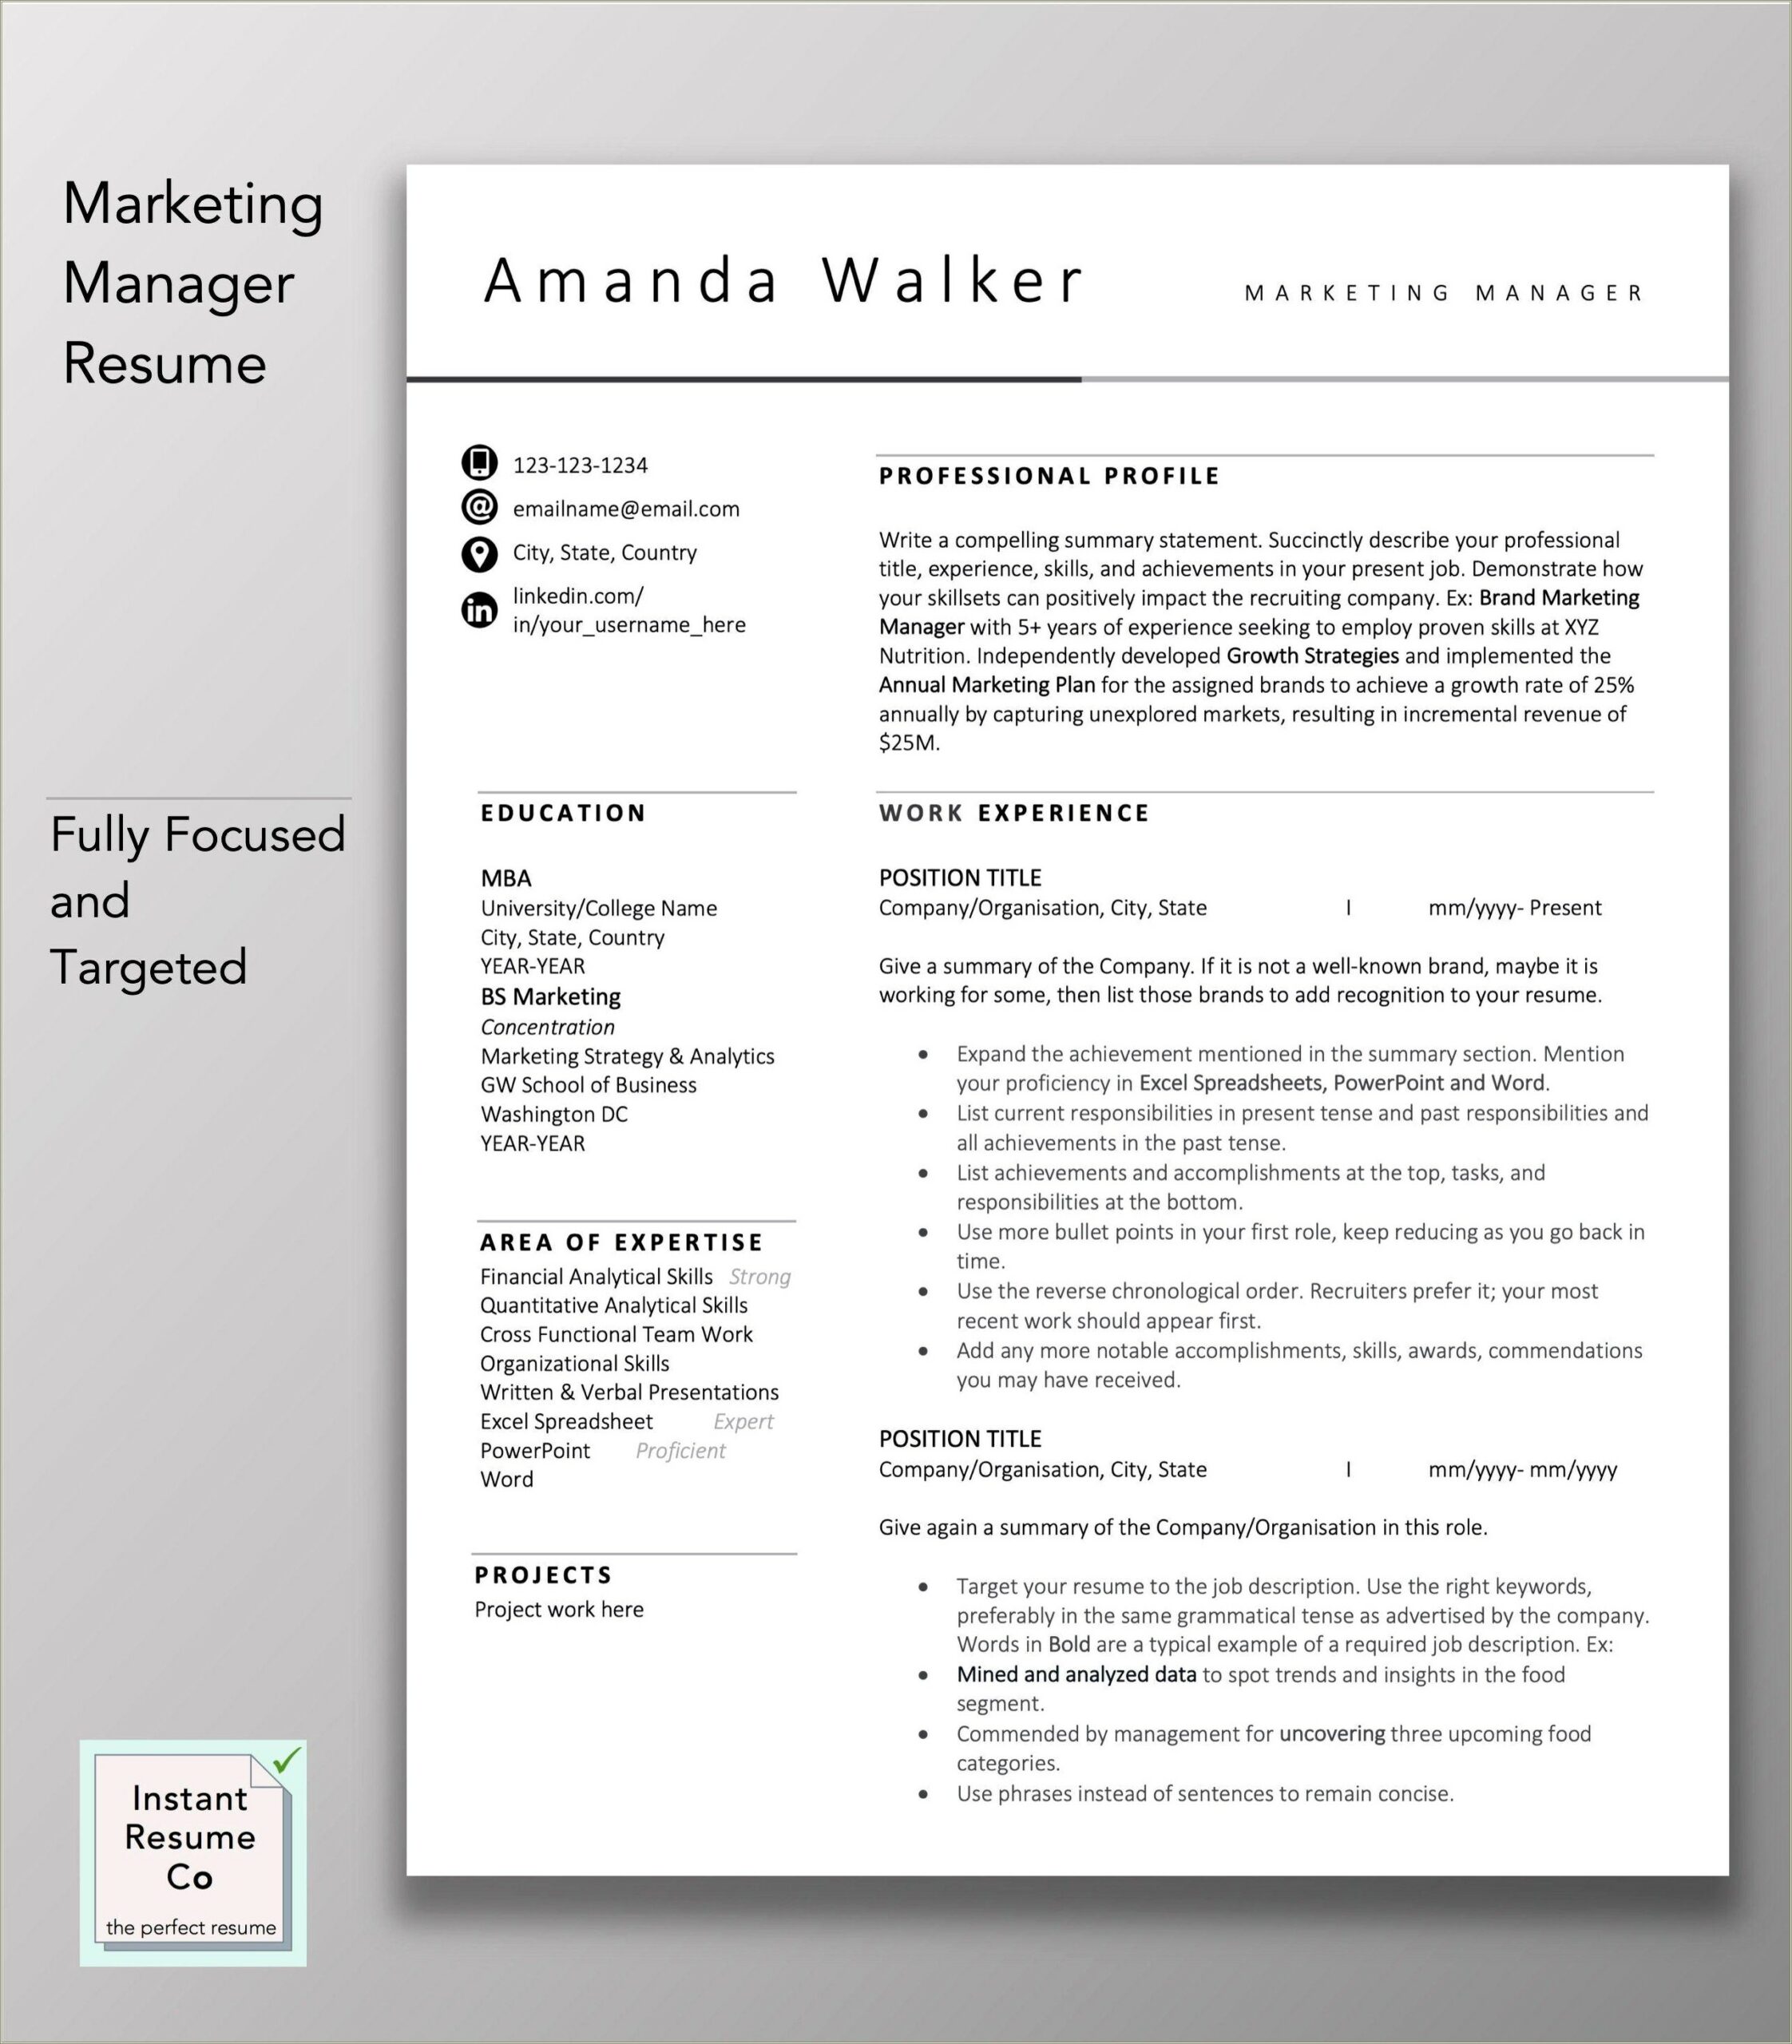 Marketing Manager Skills To Add To Resume